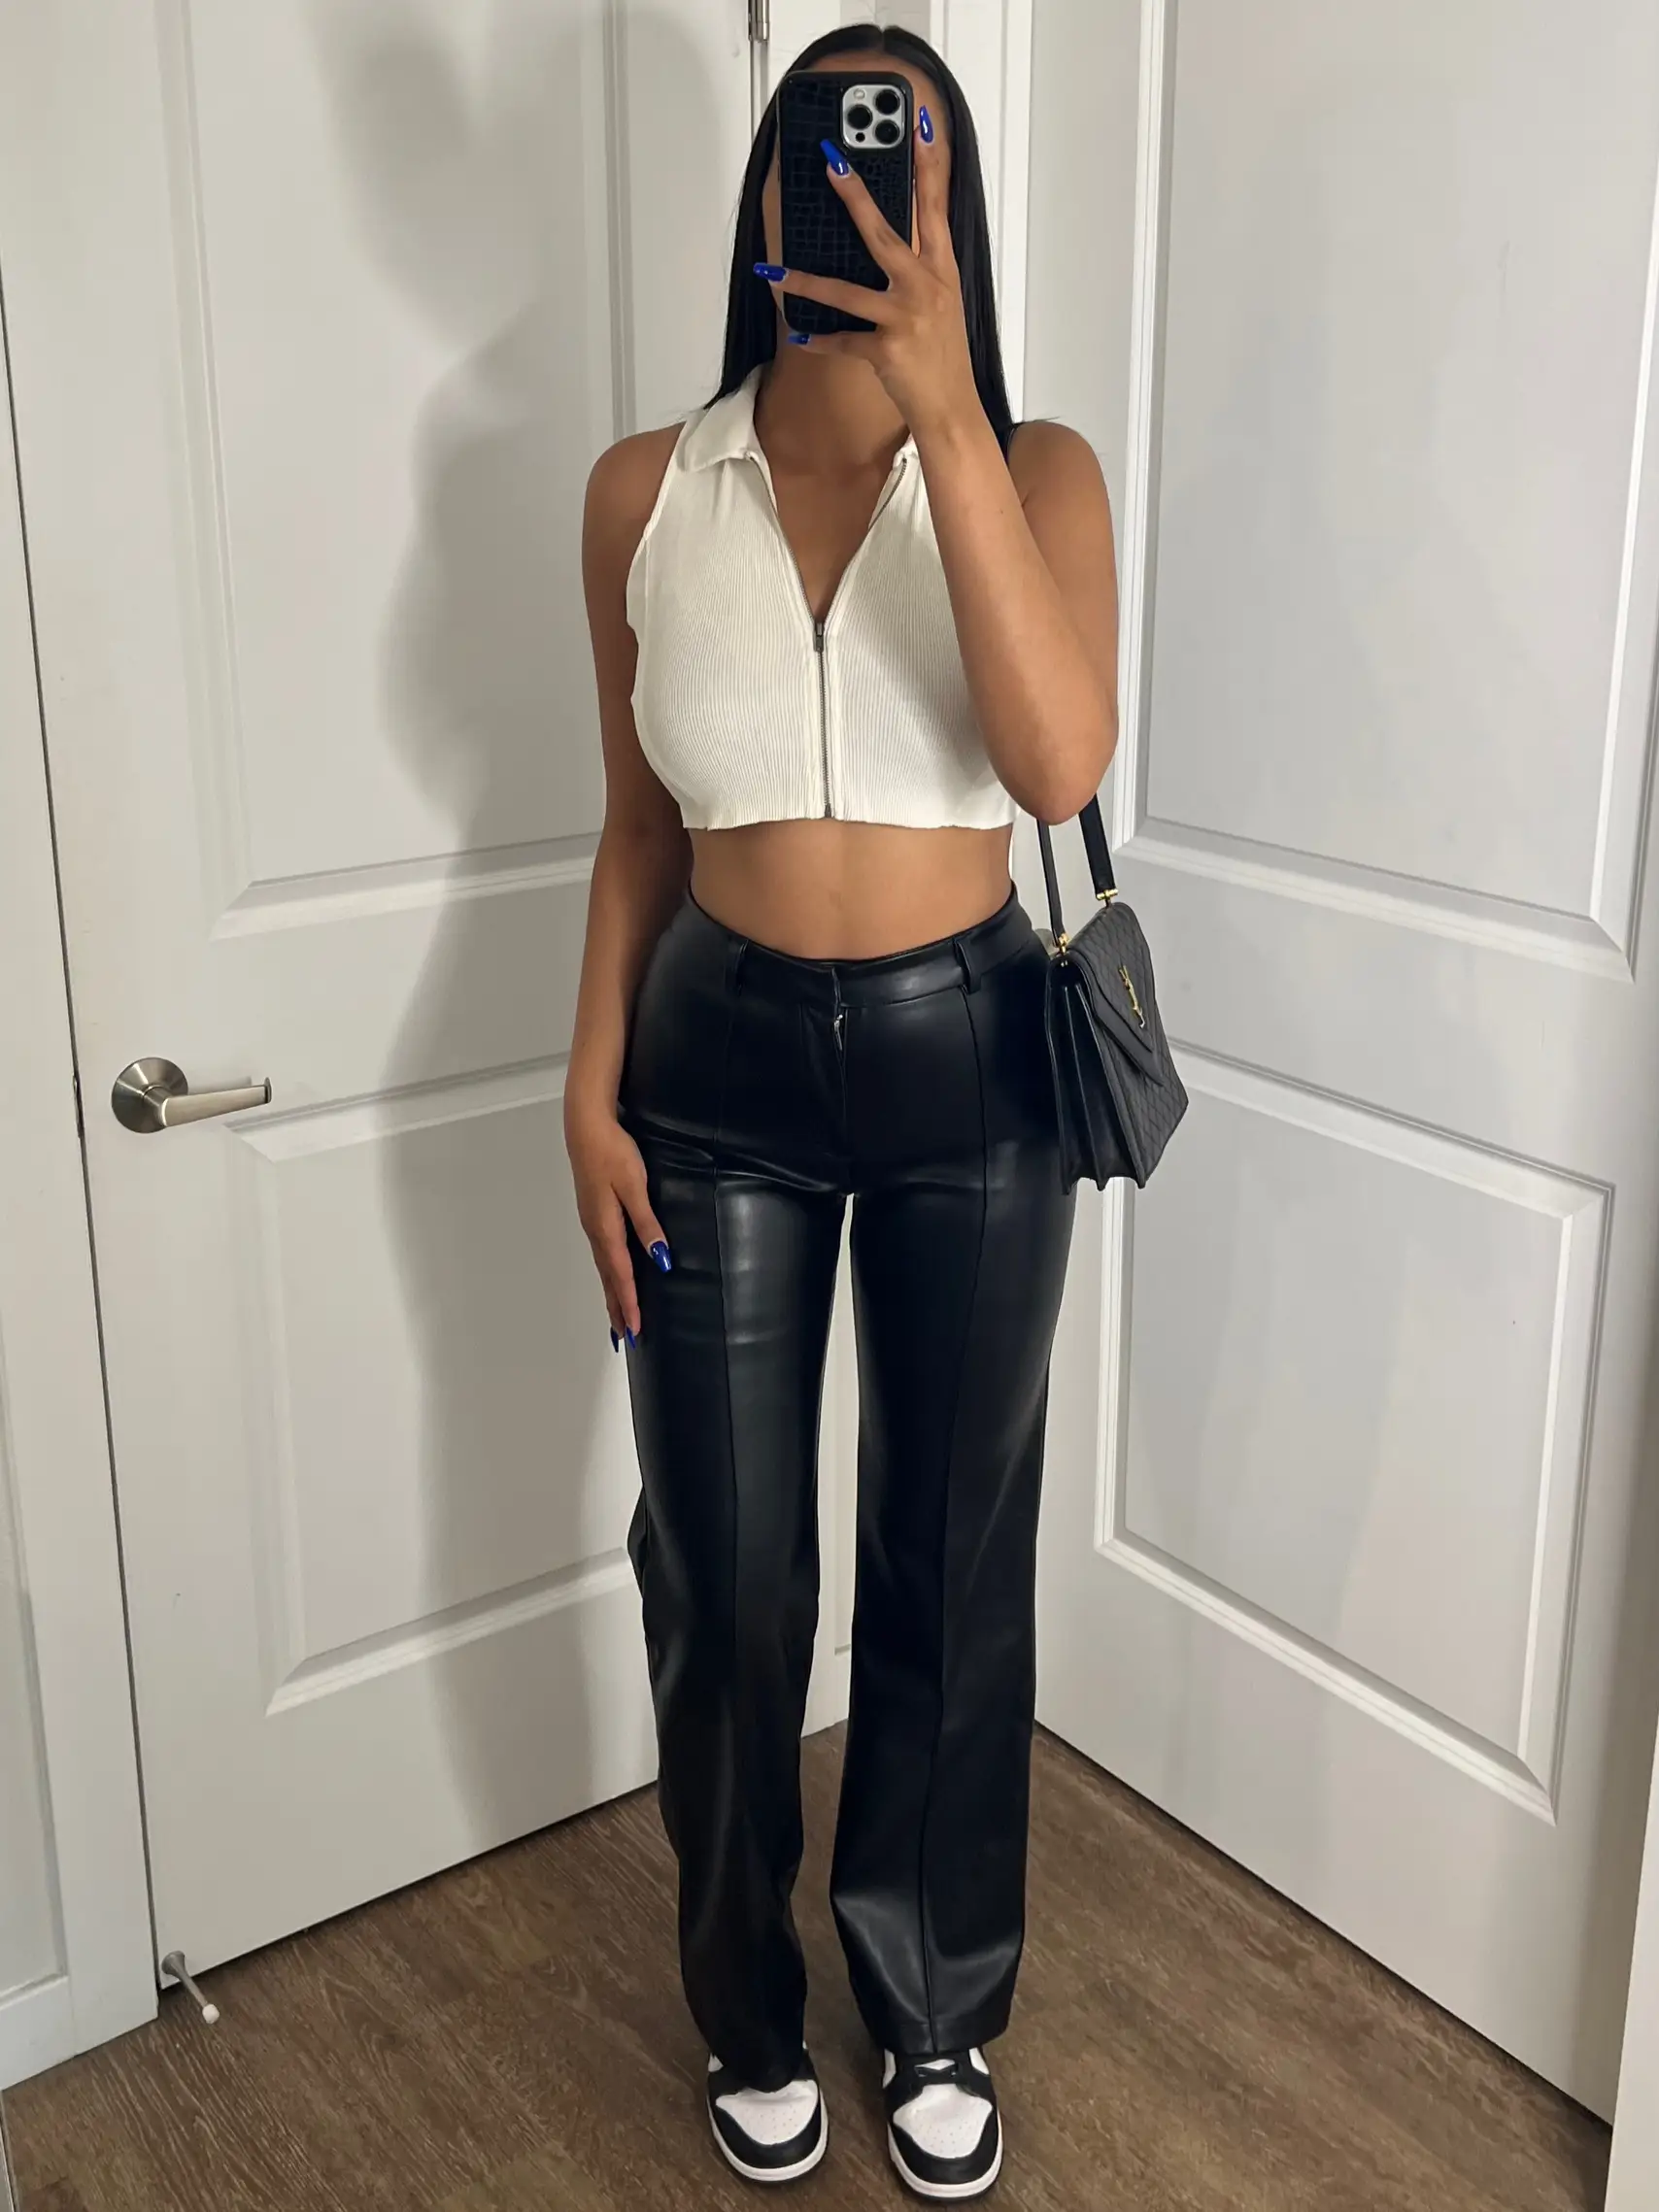 Topshop Faux Leather Pants Make Wearing This Trend Super Comfy